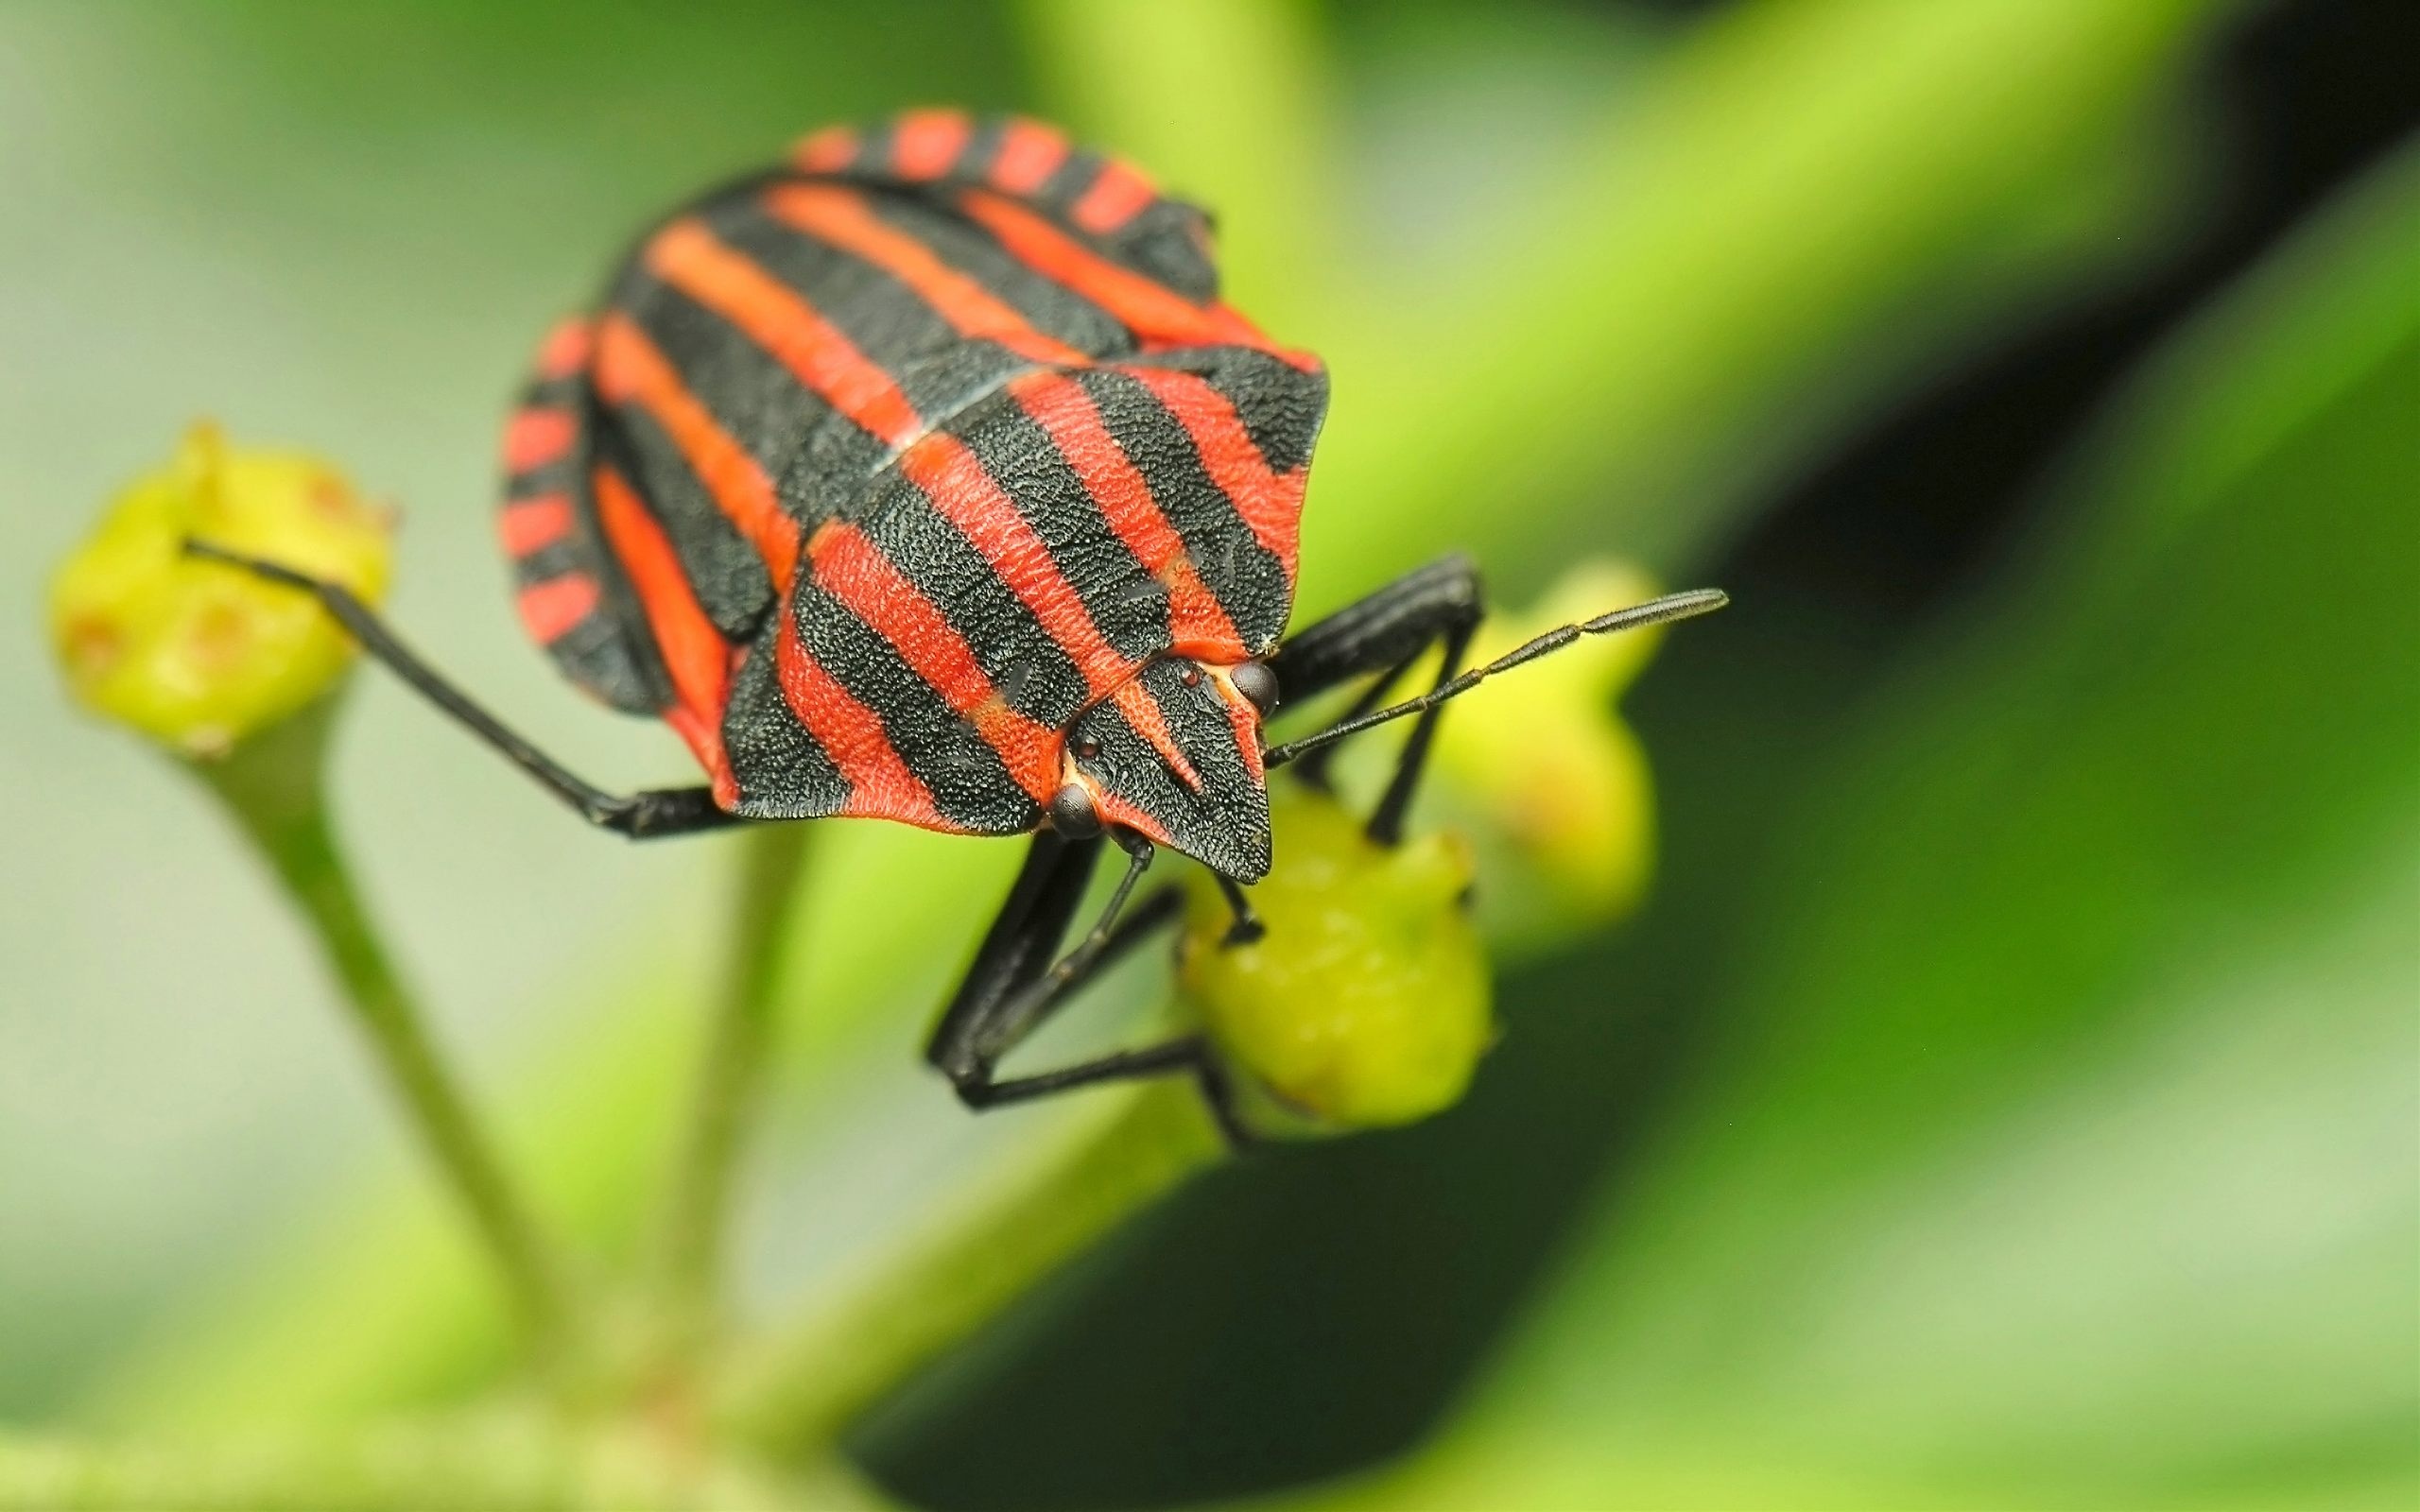 Insect HD wallpaper, Background image, 2560x1600 HD Desktop